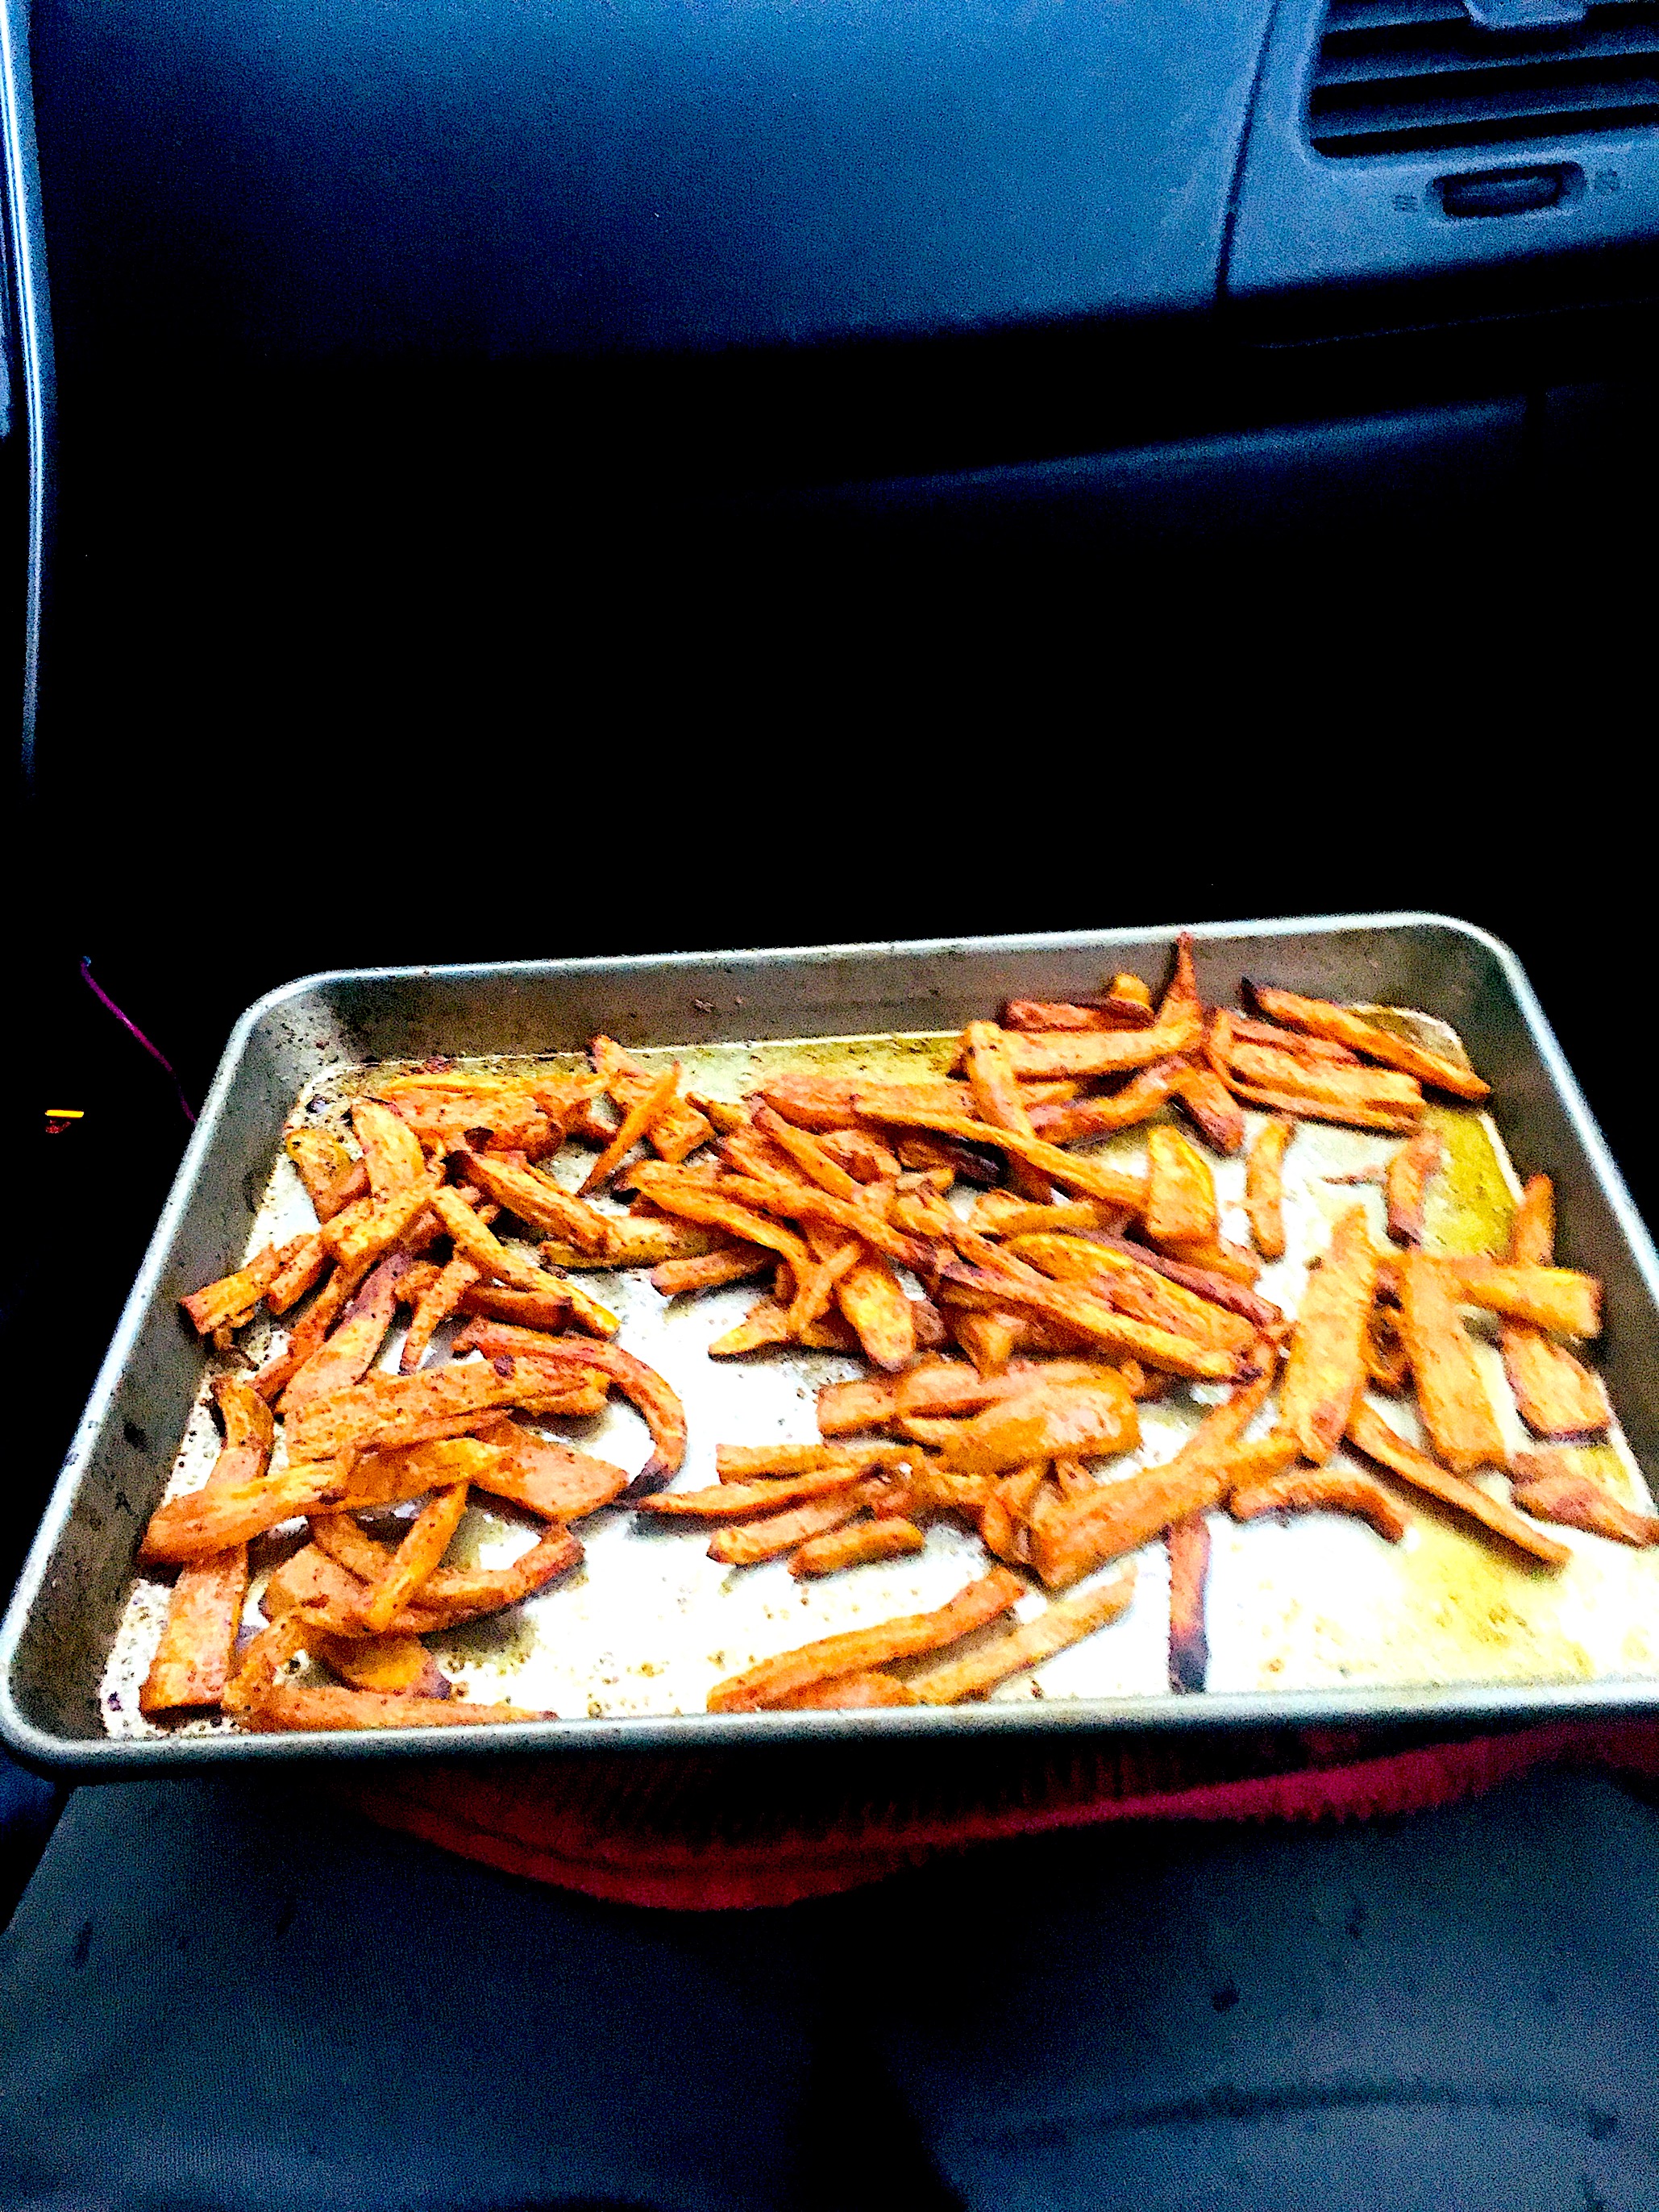 Sweet potato fries, baked with olive oil and salt. Fantastic.